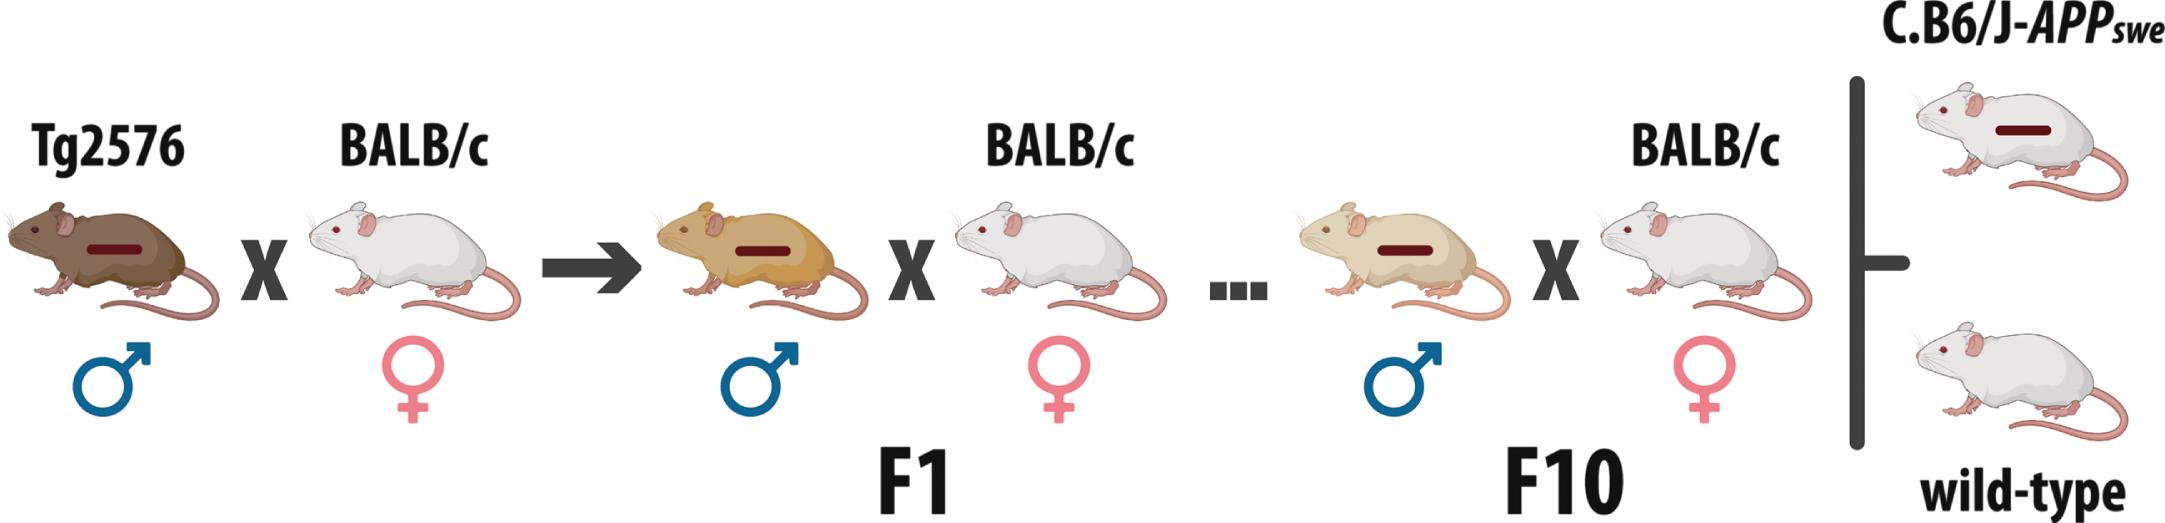 Generation of the C.B6/J-APPswe congenic mouse. The first mating was between Tg2576 males and BALB/c females. Then, from F1 to F10, BALB/c females were mated with male animals of each new generation carrying the transgene. To breed the congenic colony, female studs are obtained mating wild-type mice, while male studs are chosen from the broods used for the experiments. The horizontal bar superimposed on mice represents the transgene.